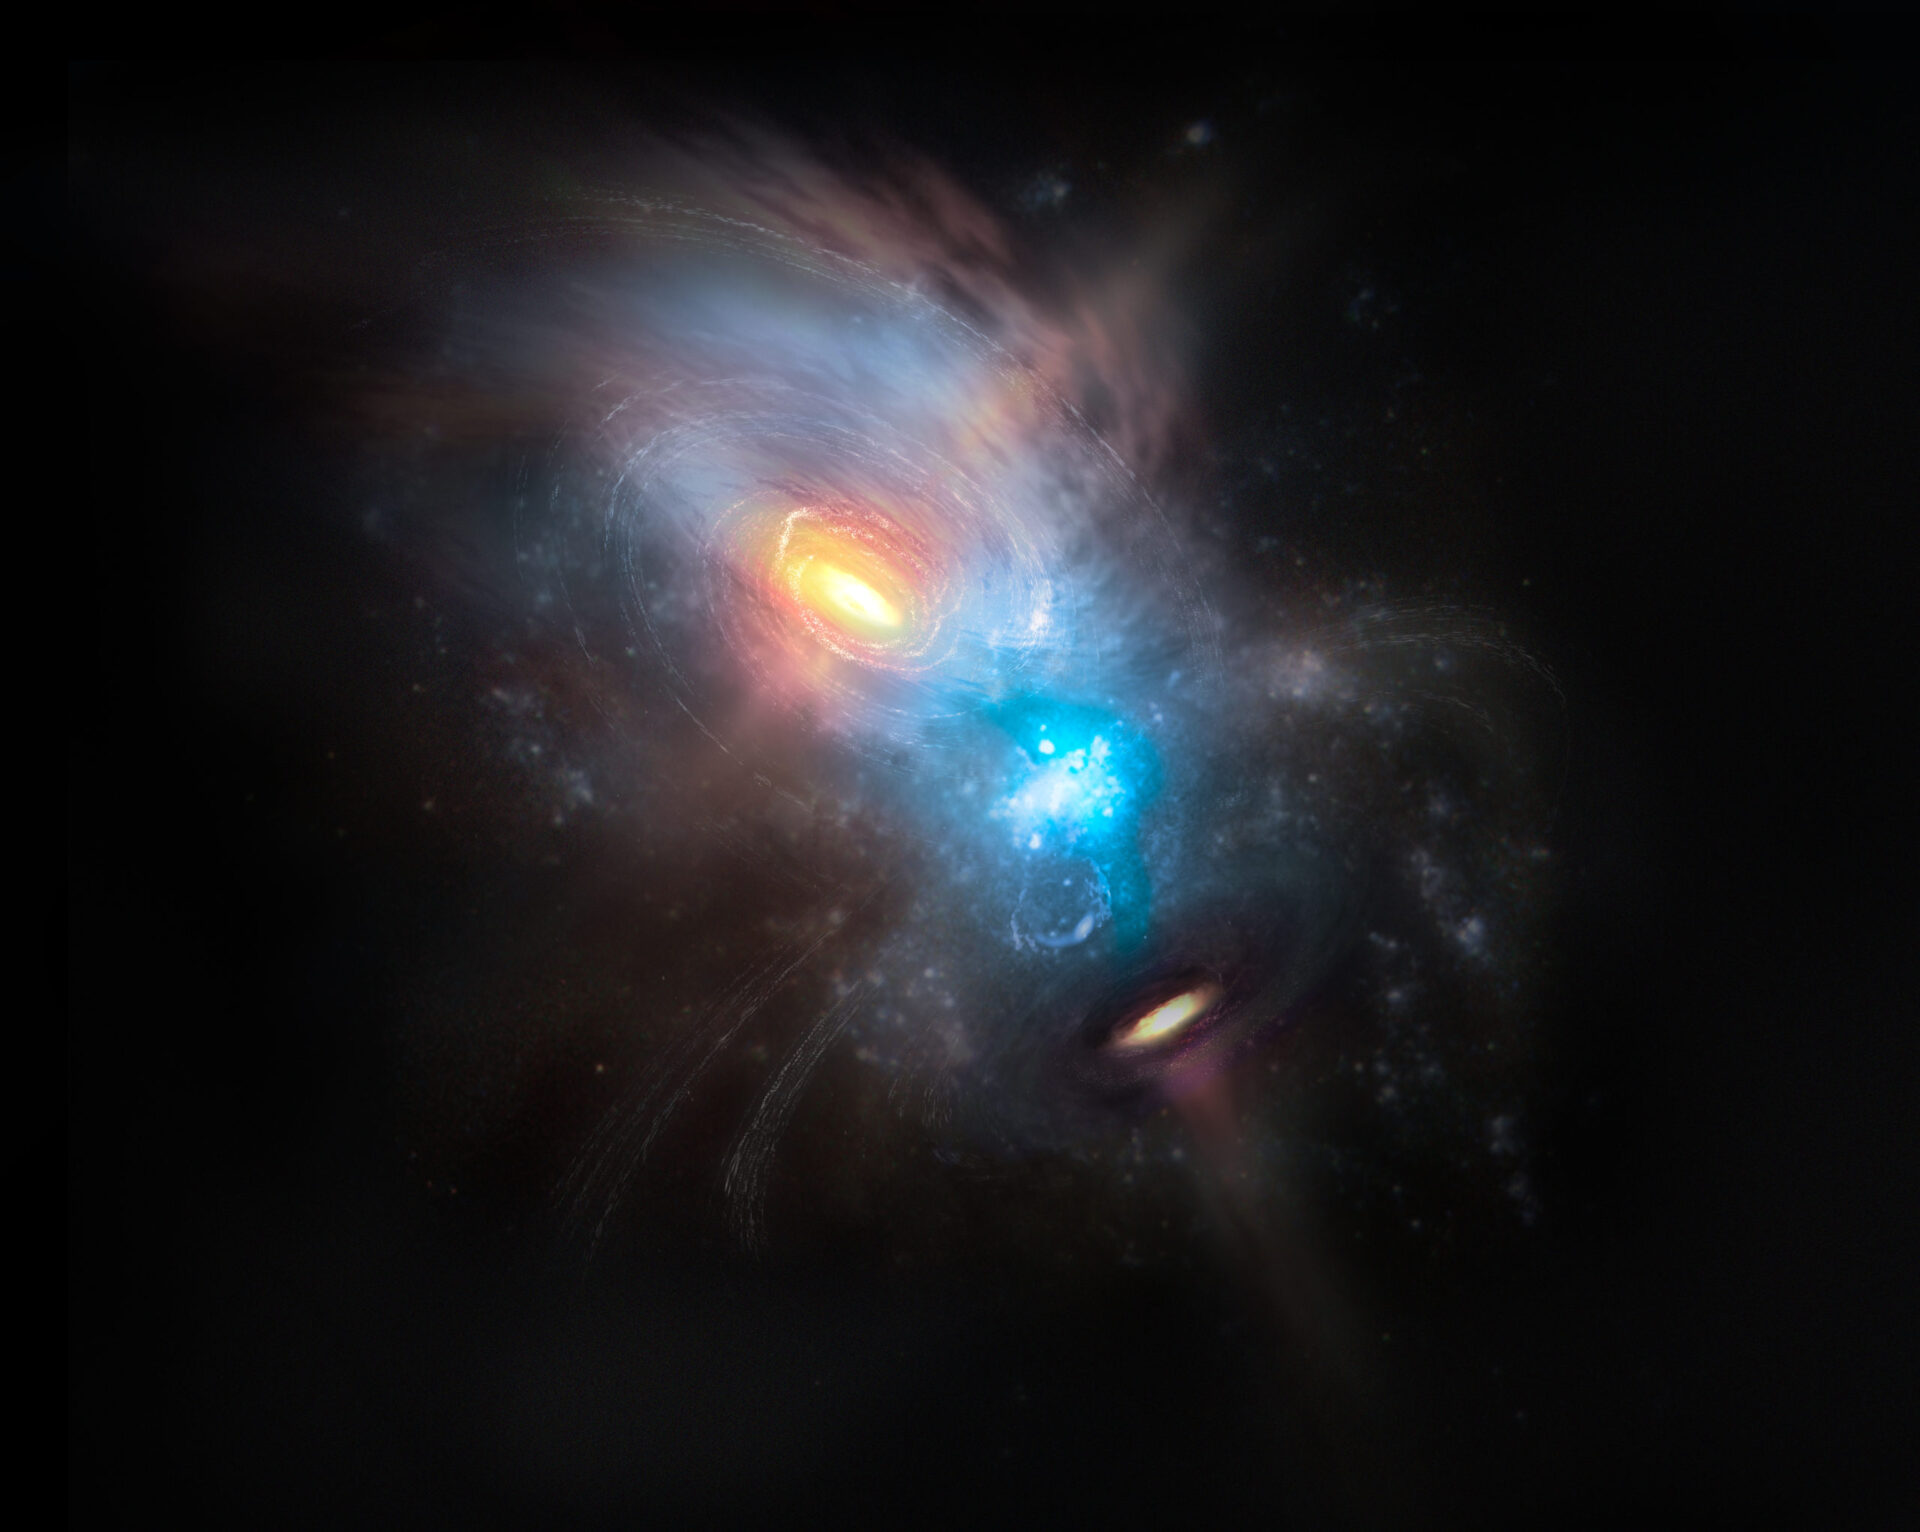 Artist impression of the merging galaxy NGC 6240. Credit: NRAO/AUI/NSF, S. Dagnello